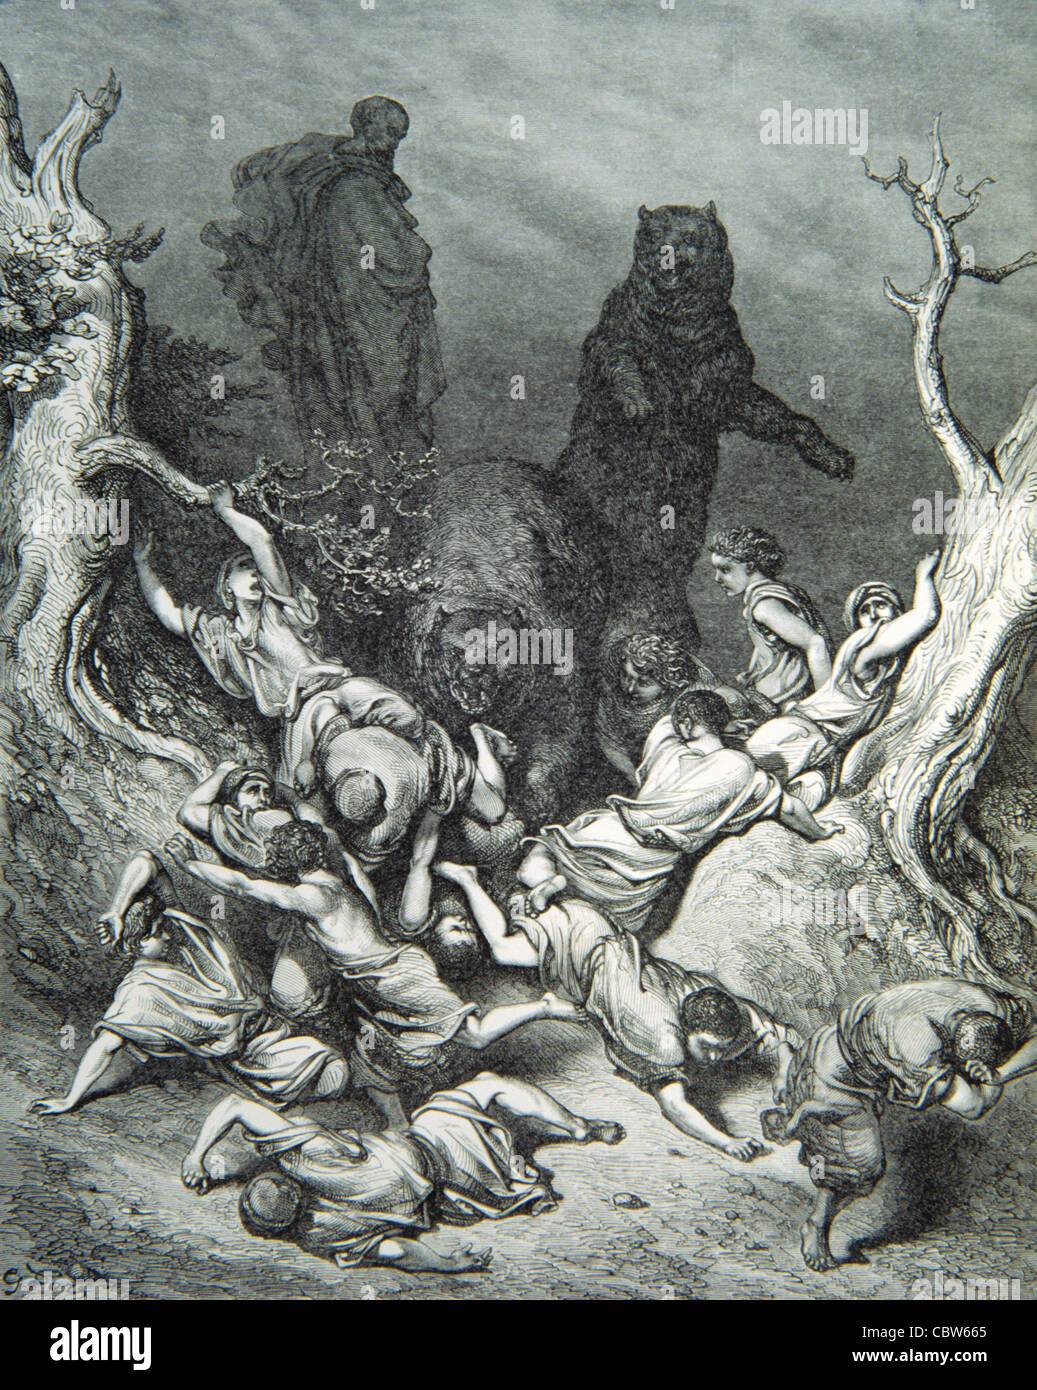 Brown Bears, Ursus arctos, Attacking Children, 'The Children Destroyed by Bears', from The Doré Bible, Engraving by Gustave Doré, 1866 Stock Photo